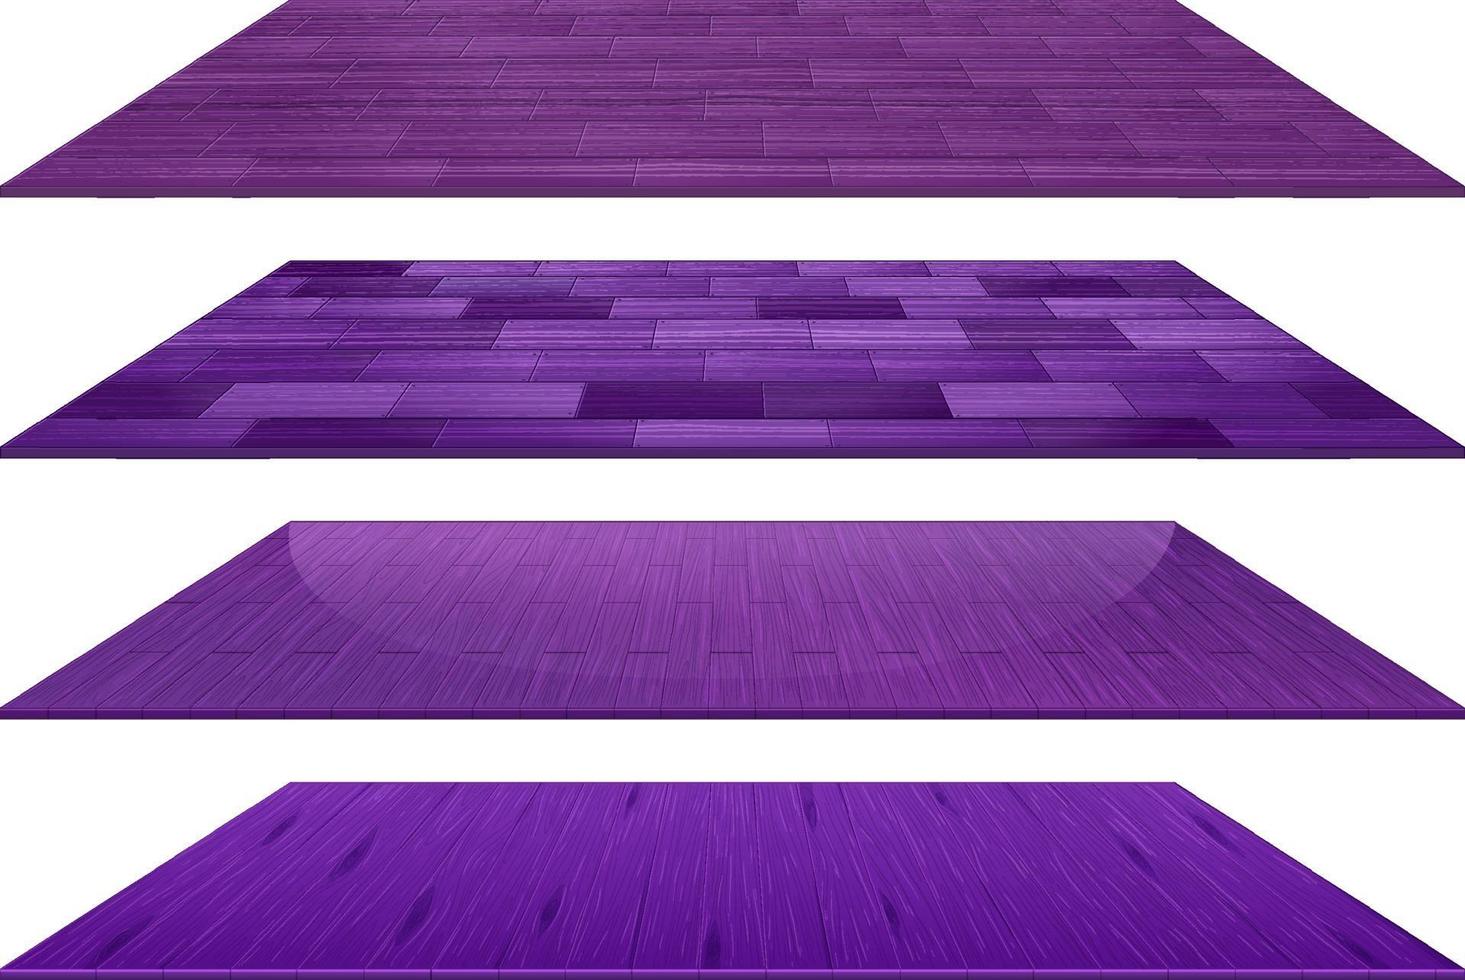 Set of different purple wooden floor tiles on white background vector